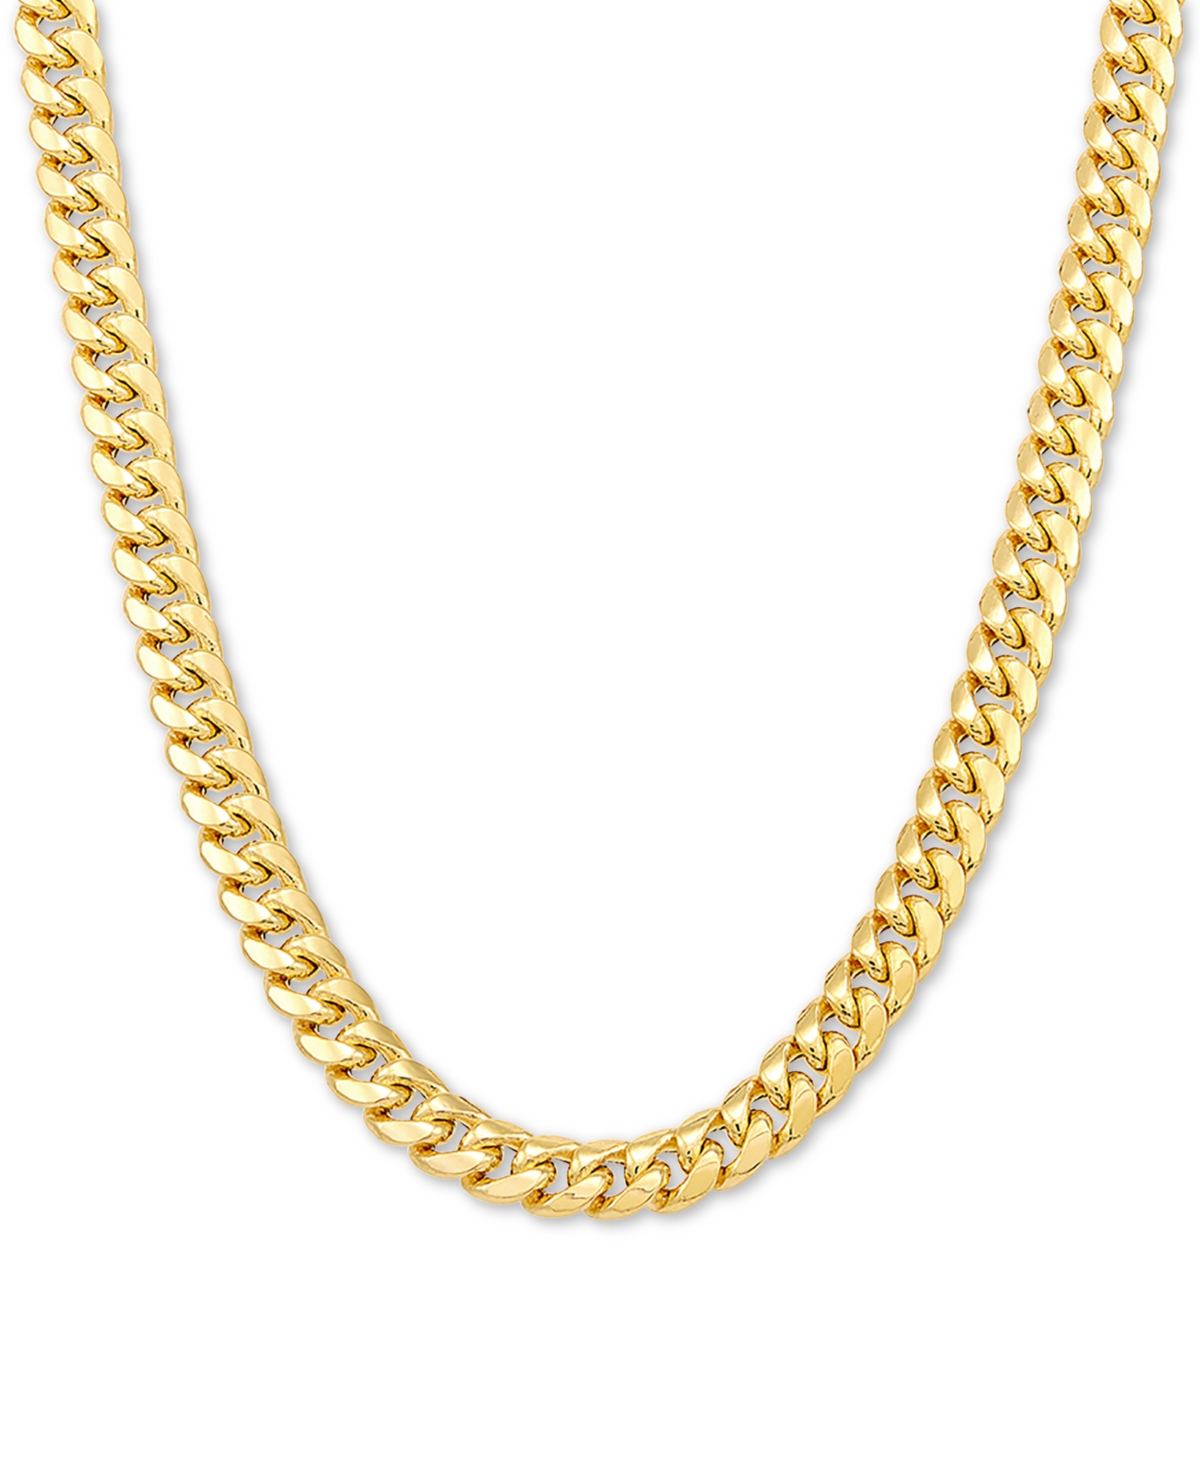 Miami Cuban Link 26" Chain Necklace (6mm) in 10k Gold - Yellow Gold